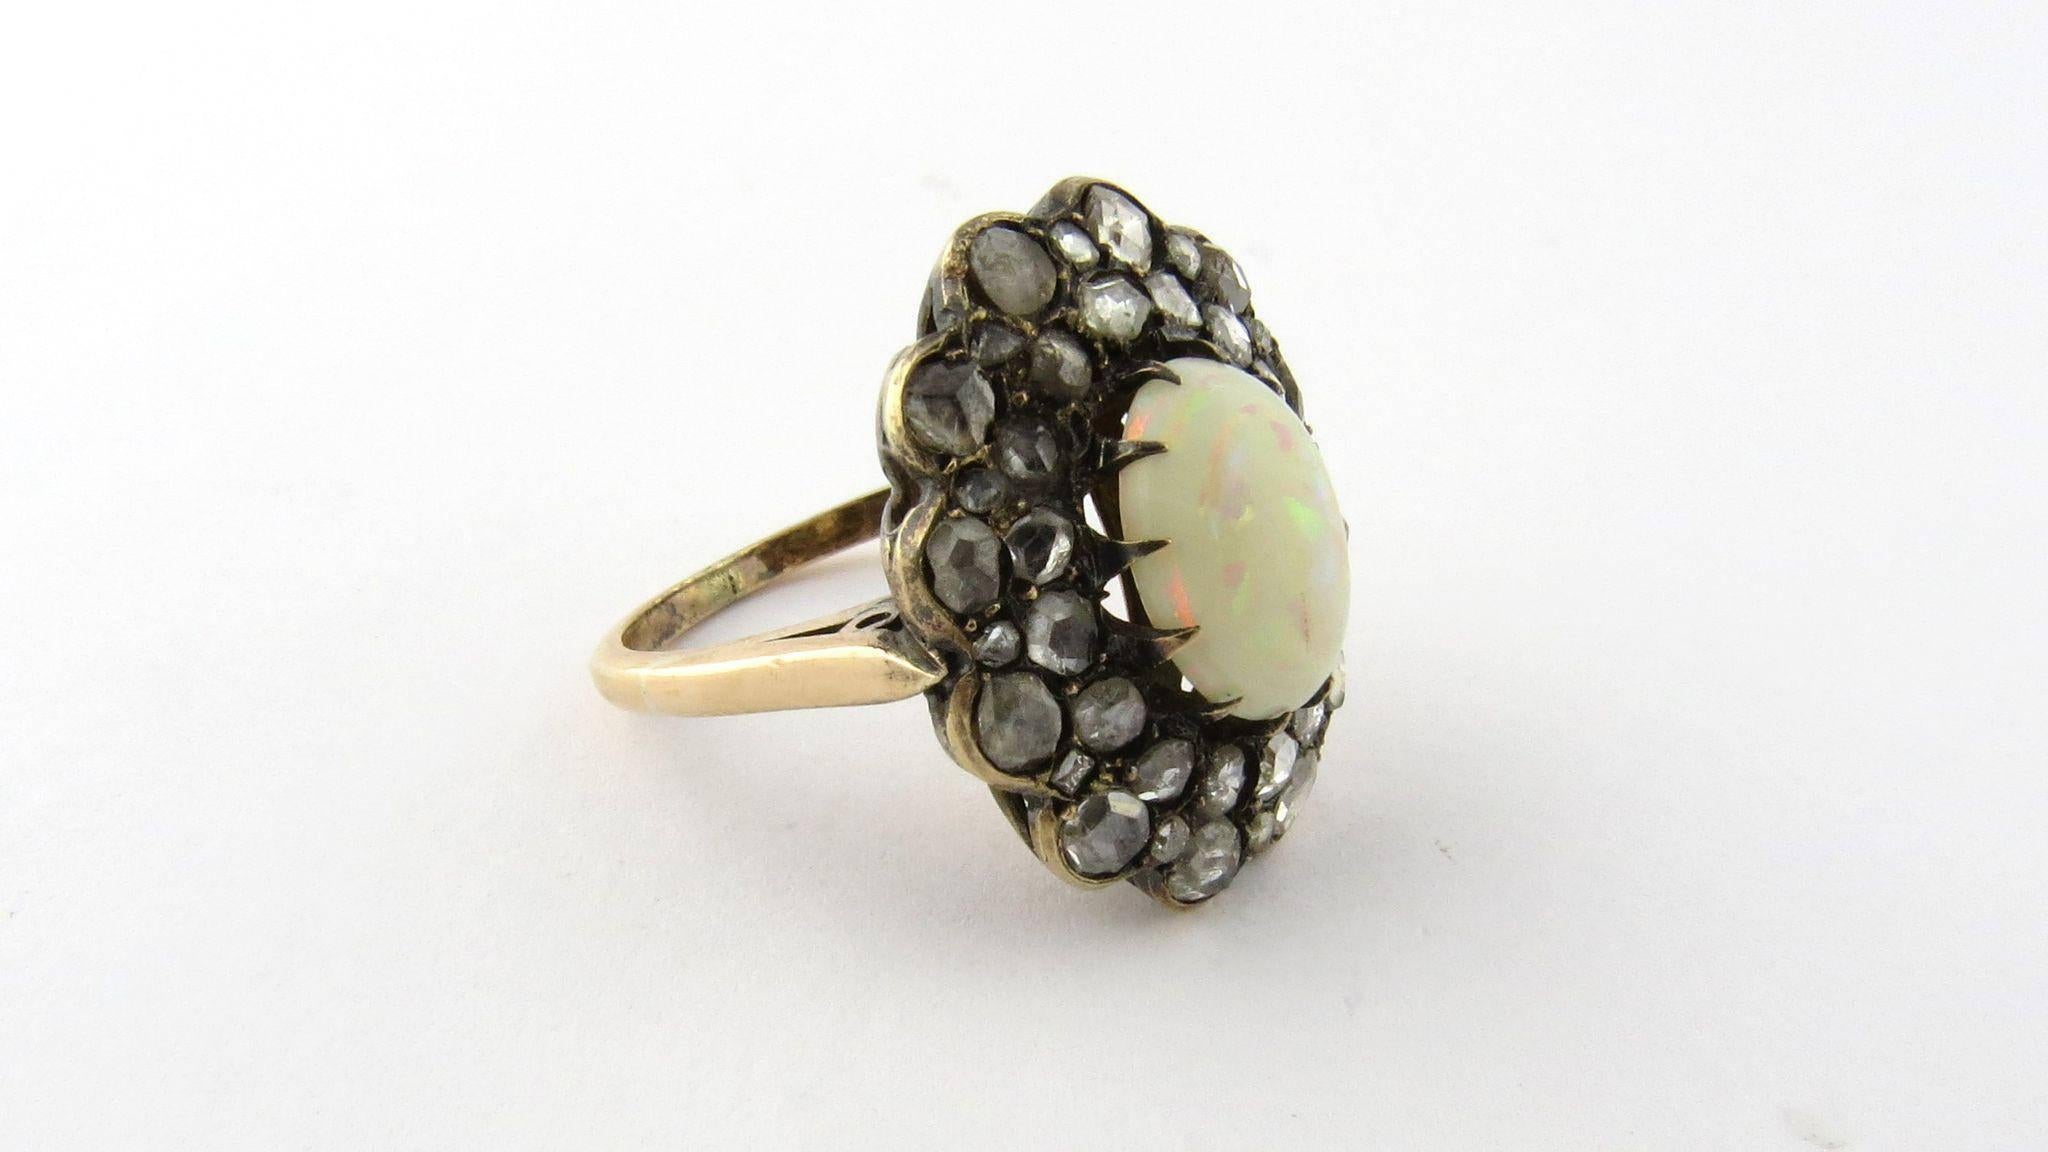 Antique Victorian Opal and Rose Cut Diamond 

14k Yellow Gold Ring 

Size 5 

This cluster ring is set with a center genuine opal that is surrounded by rose cut diamonds. 

The opal is approximately 11 mm x 8.5 mm 

40 rose cut diamonds ranging in